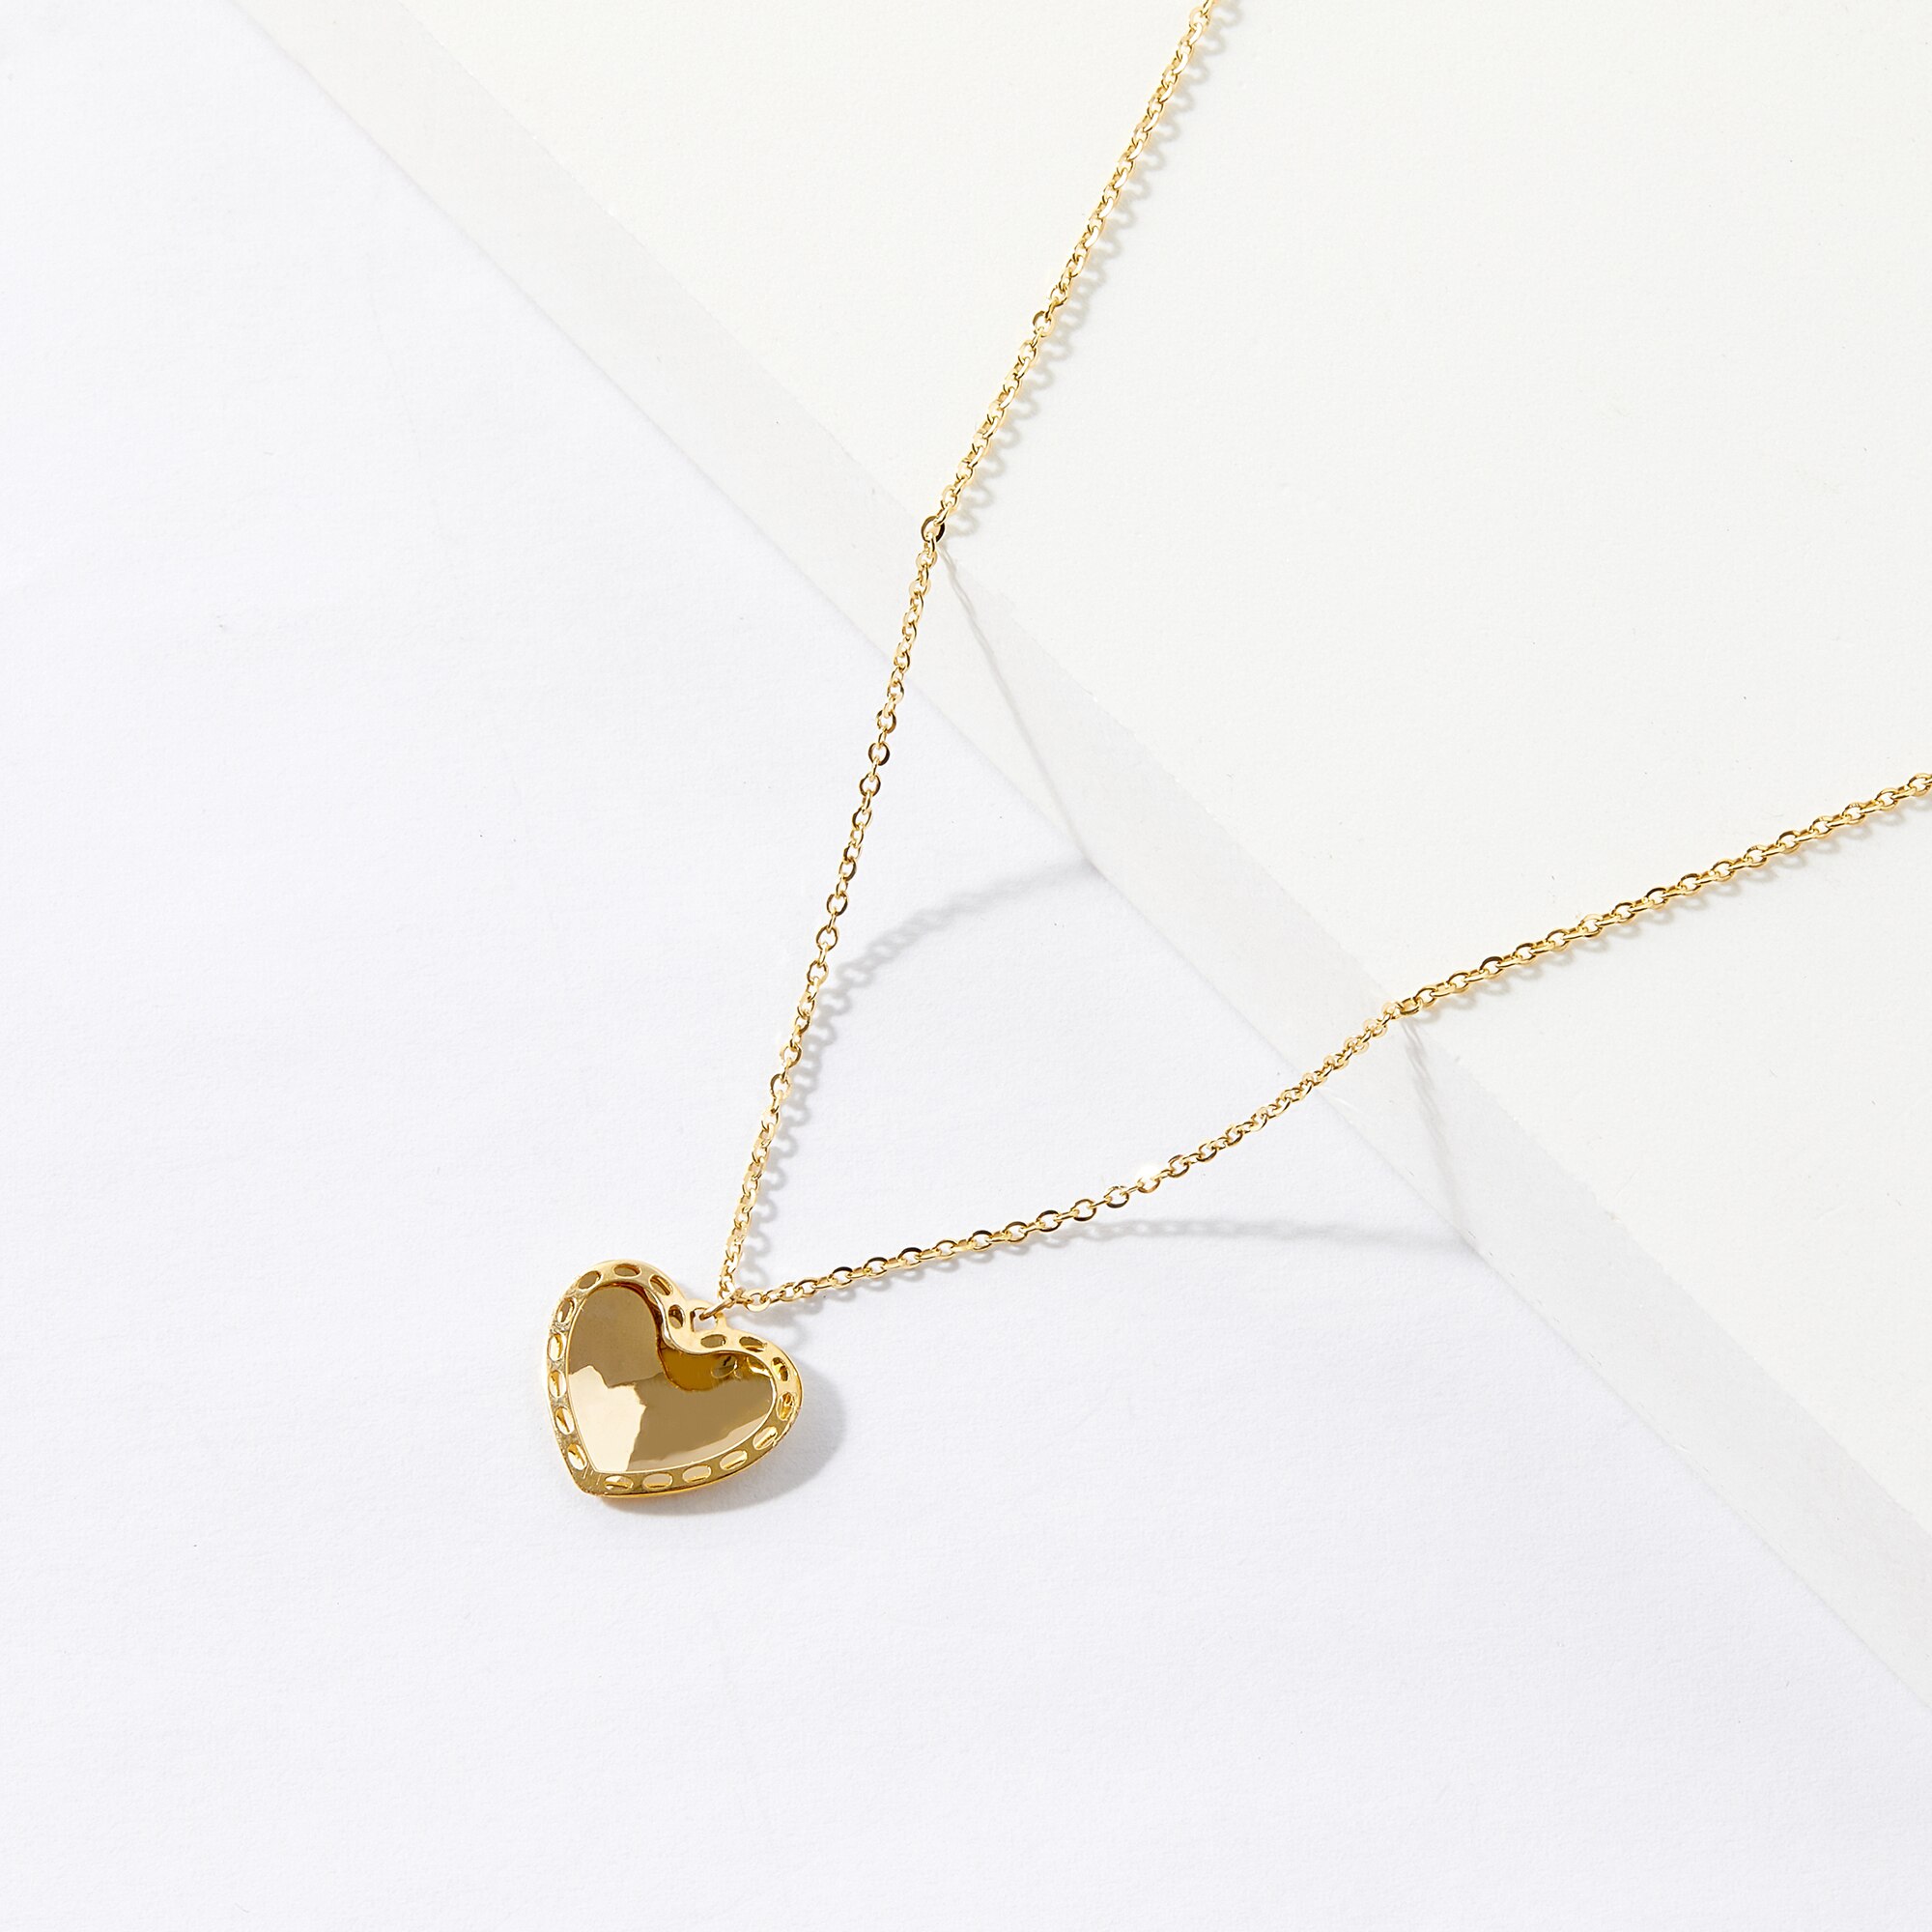 TruGold 10K Yellow Gold Diamond Cut Heart Necklace